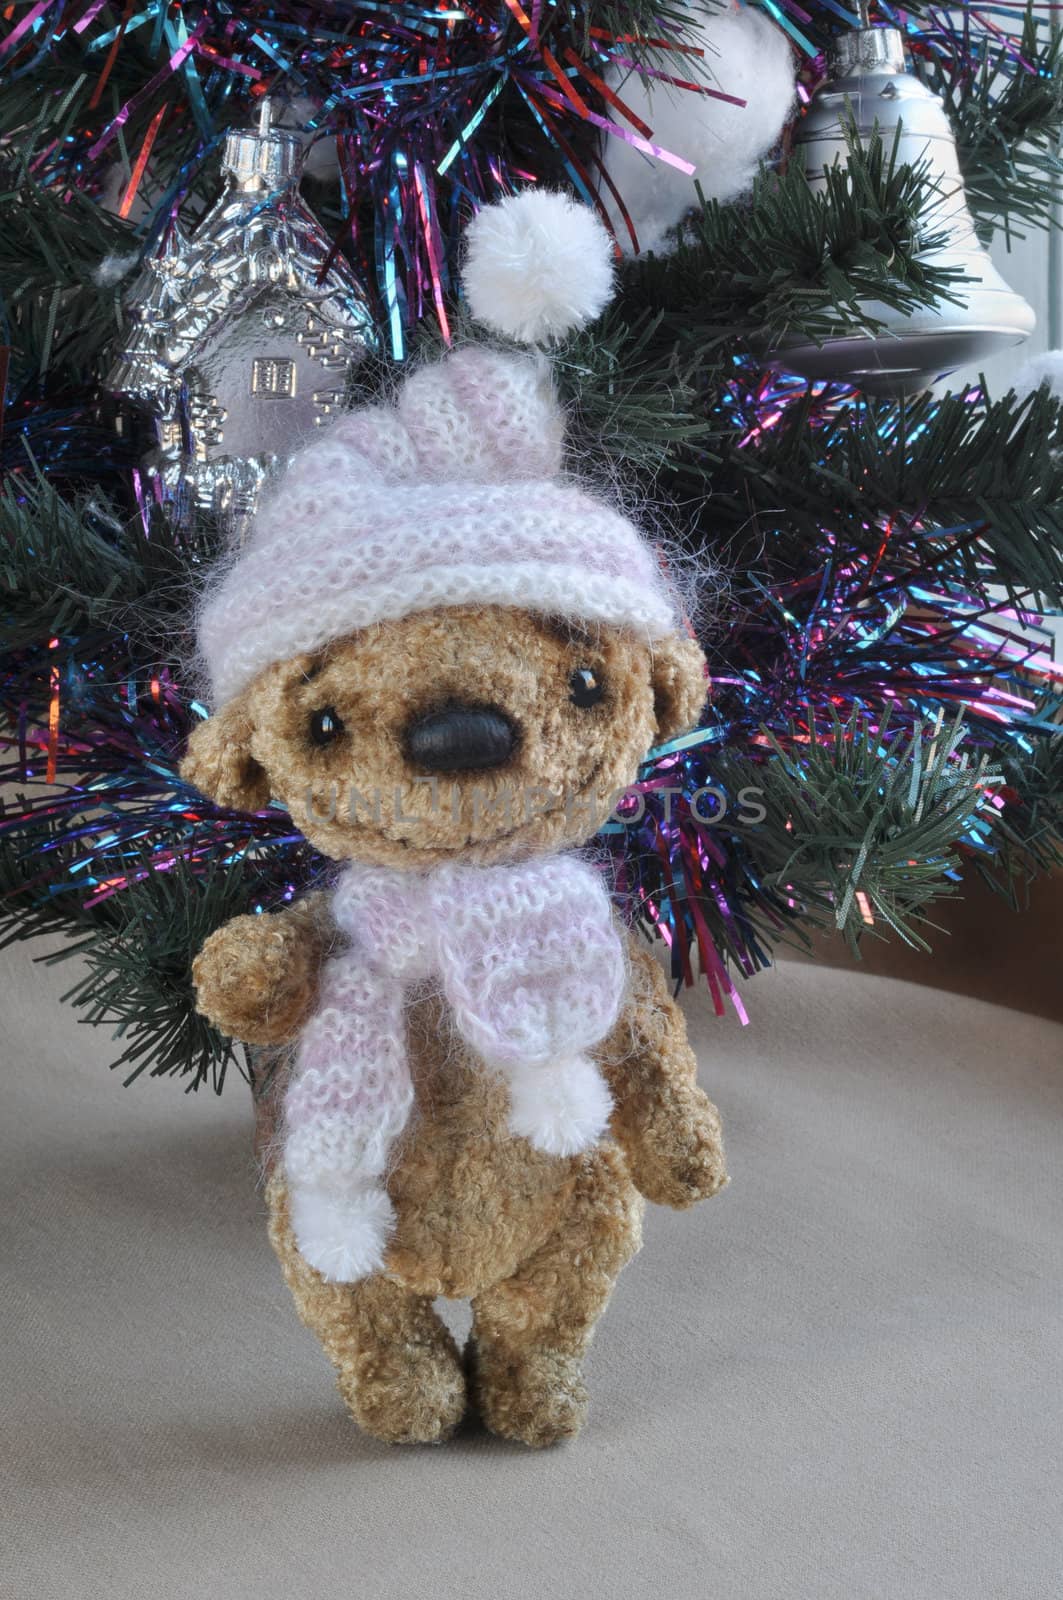 Toy teddy bear in a knitted cap, handmade, under a christmas tree